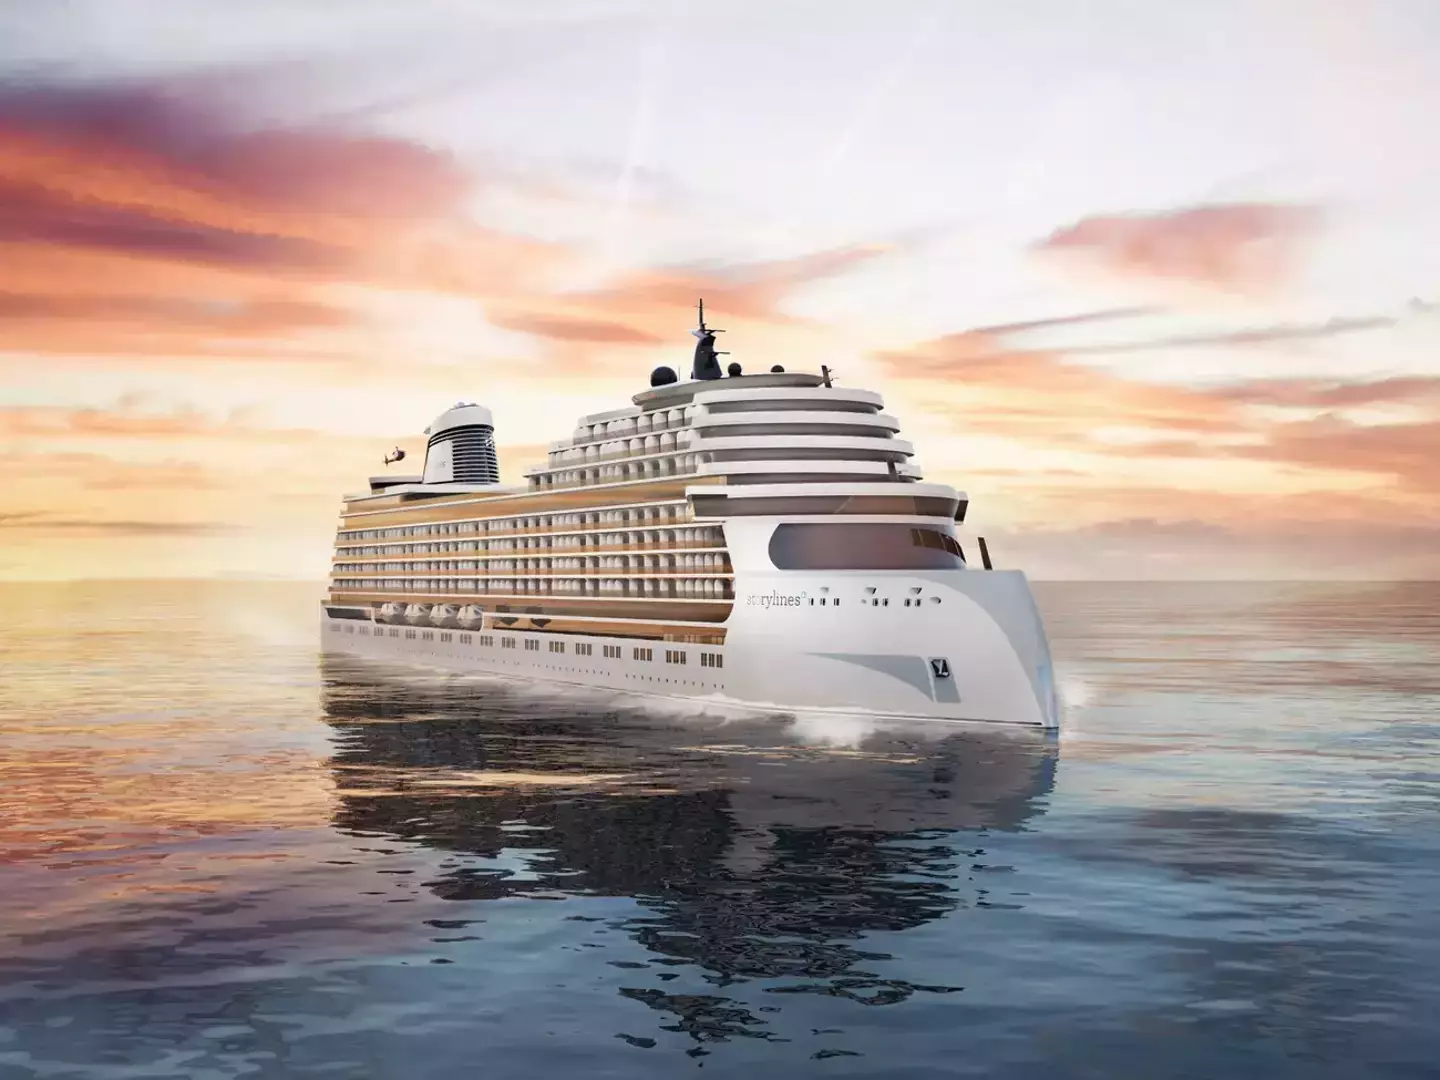 The MV Narrative is a luxury cruise ship planned to set sail in 2025. (Storylines)